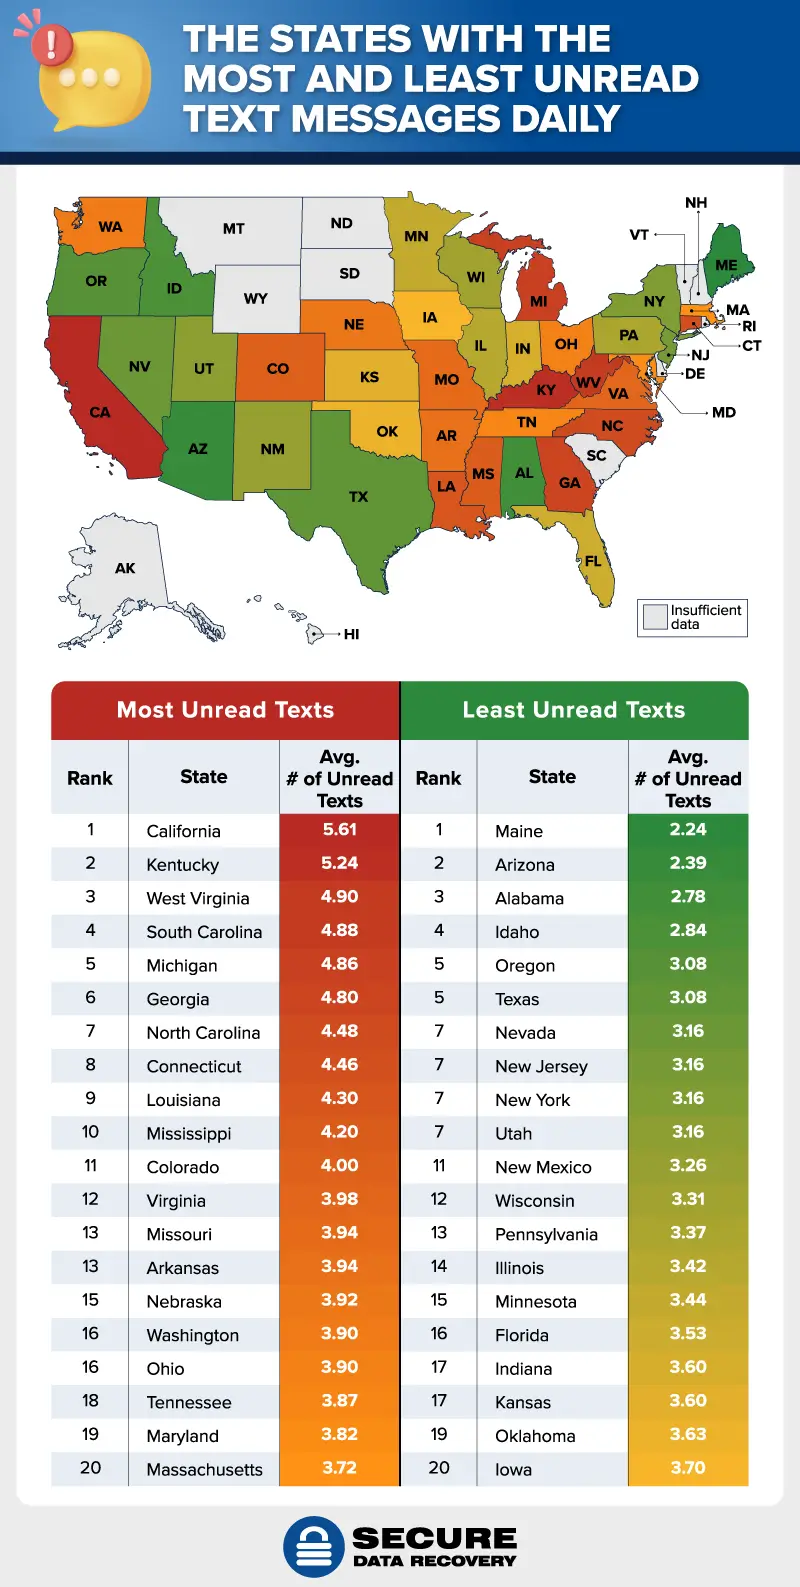 states with the most and least unread text messages